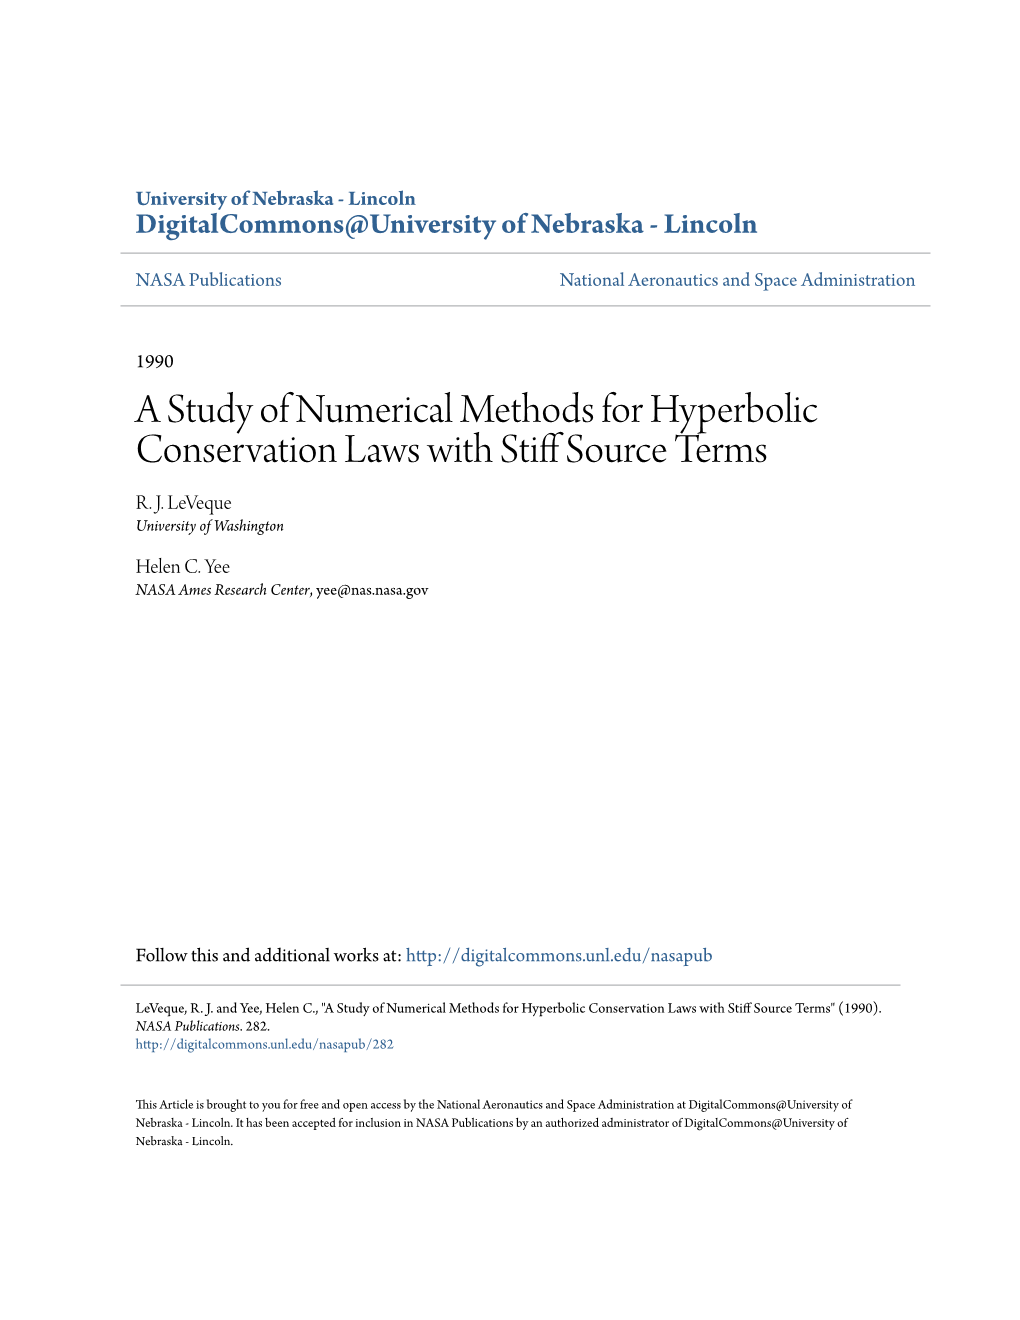 A Study of Numerical Methods for Hyperbolic Conservation Laws with Stiff Ours Ce Terms R